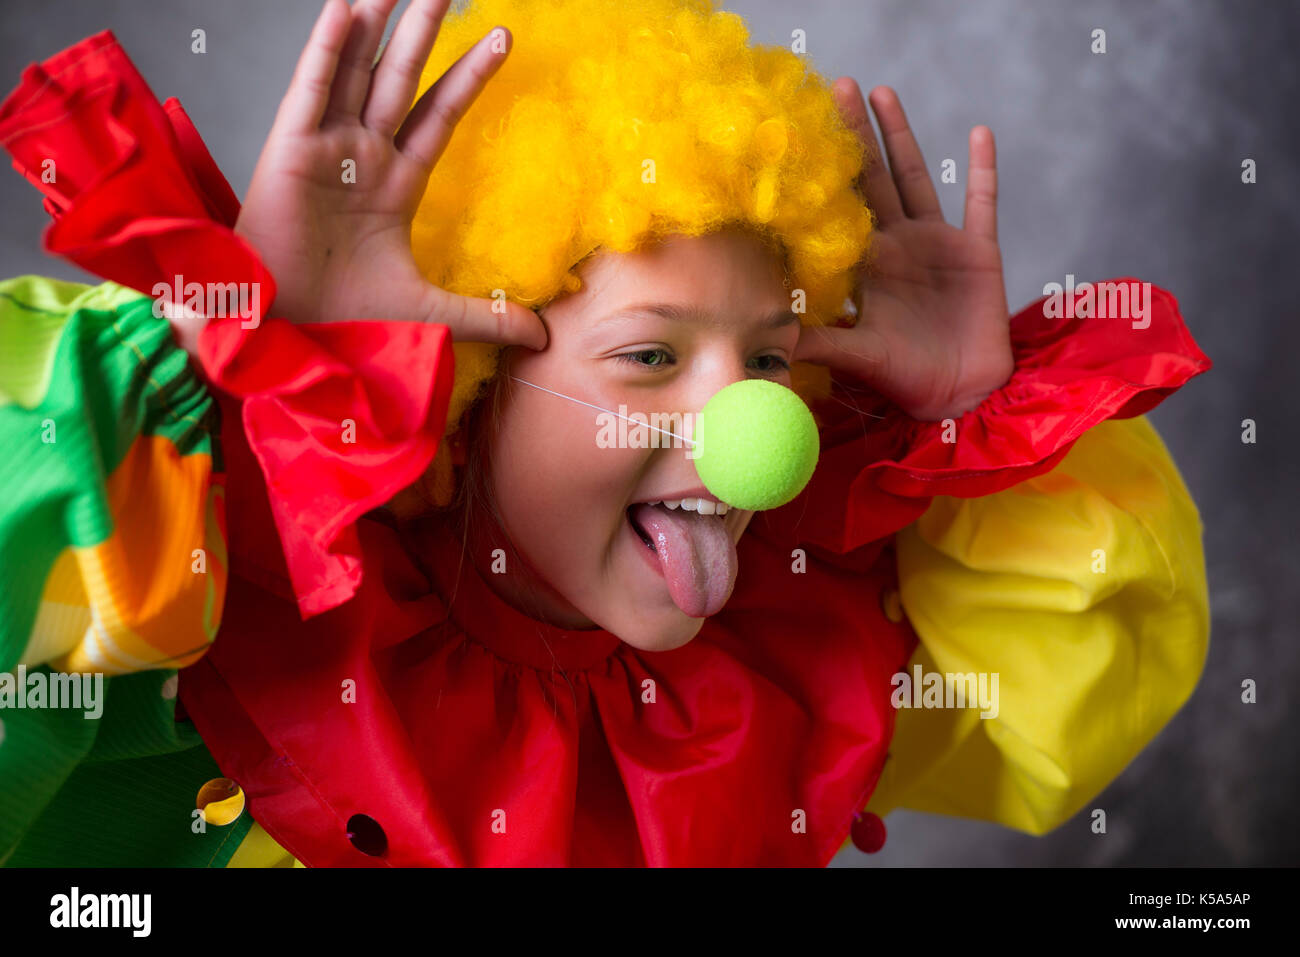 little clown showing tongue with funny grimace Stock Photo